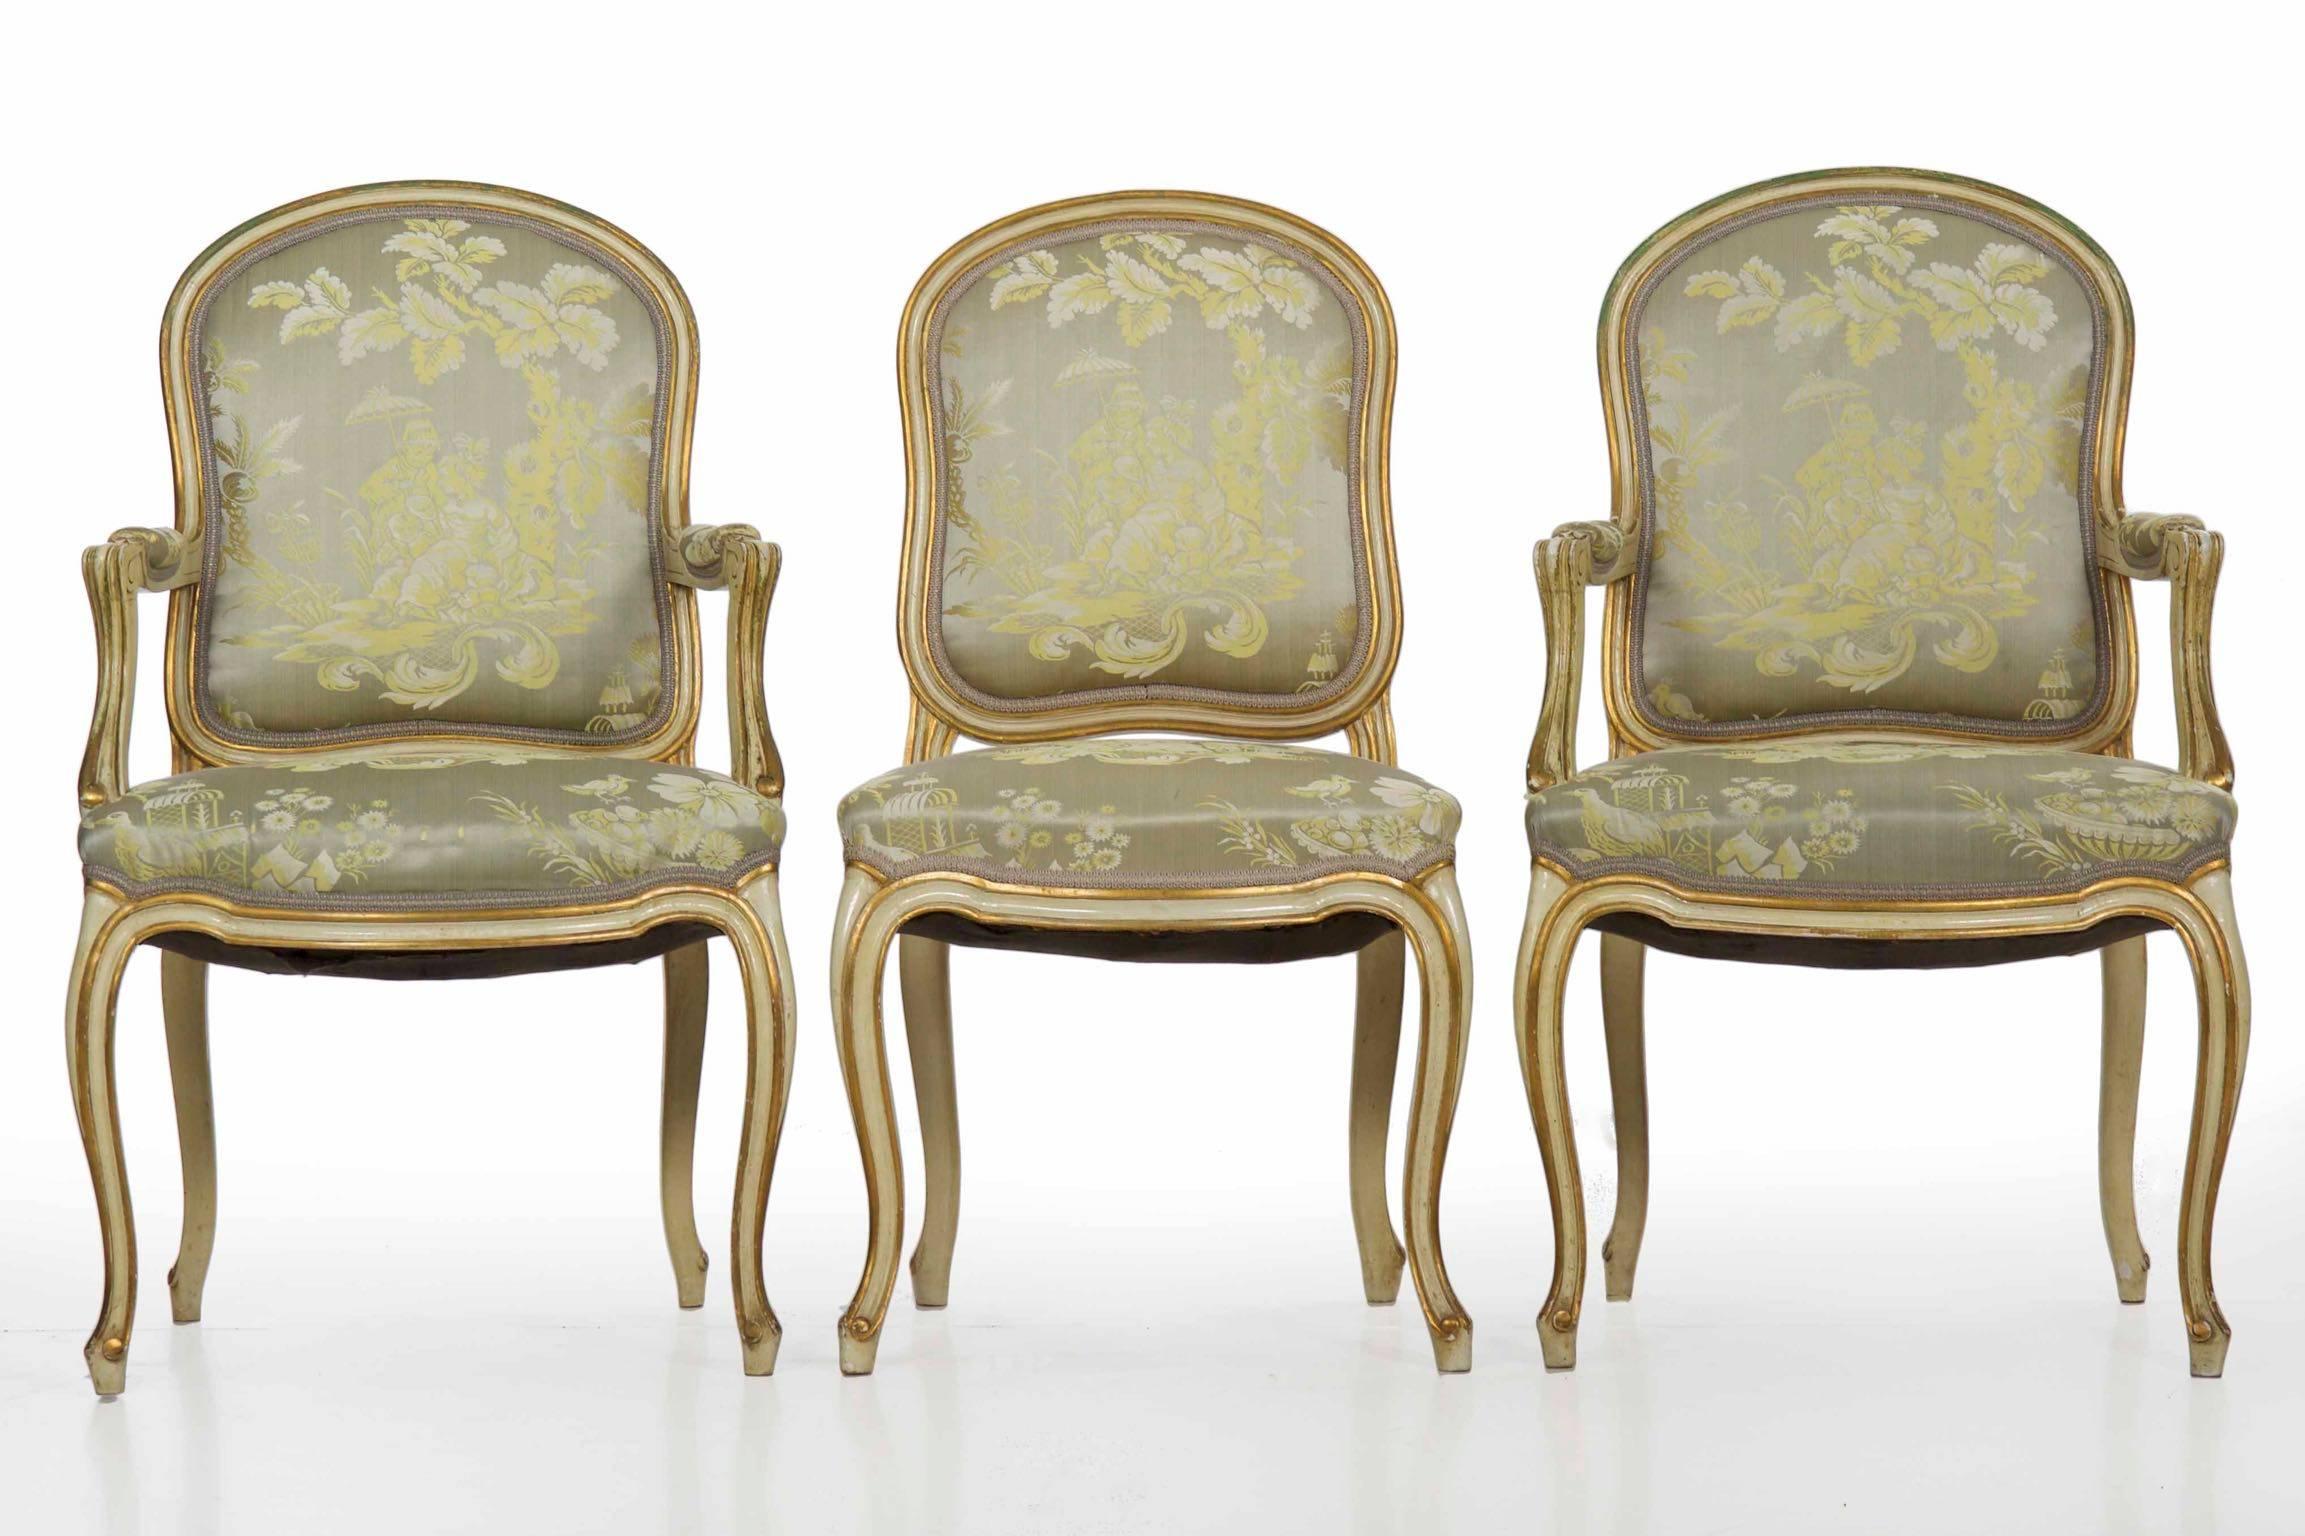 This gorgeous set of vintage French Louis XV style dining chairs is quite large, comprised of ten side chairs and two-arm chairs. They remain in excellent vintage condition with multiple layers of polychroming, showing brilliant jade, gilt and beige